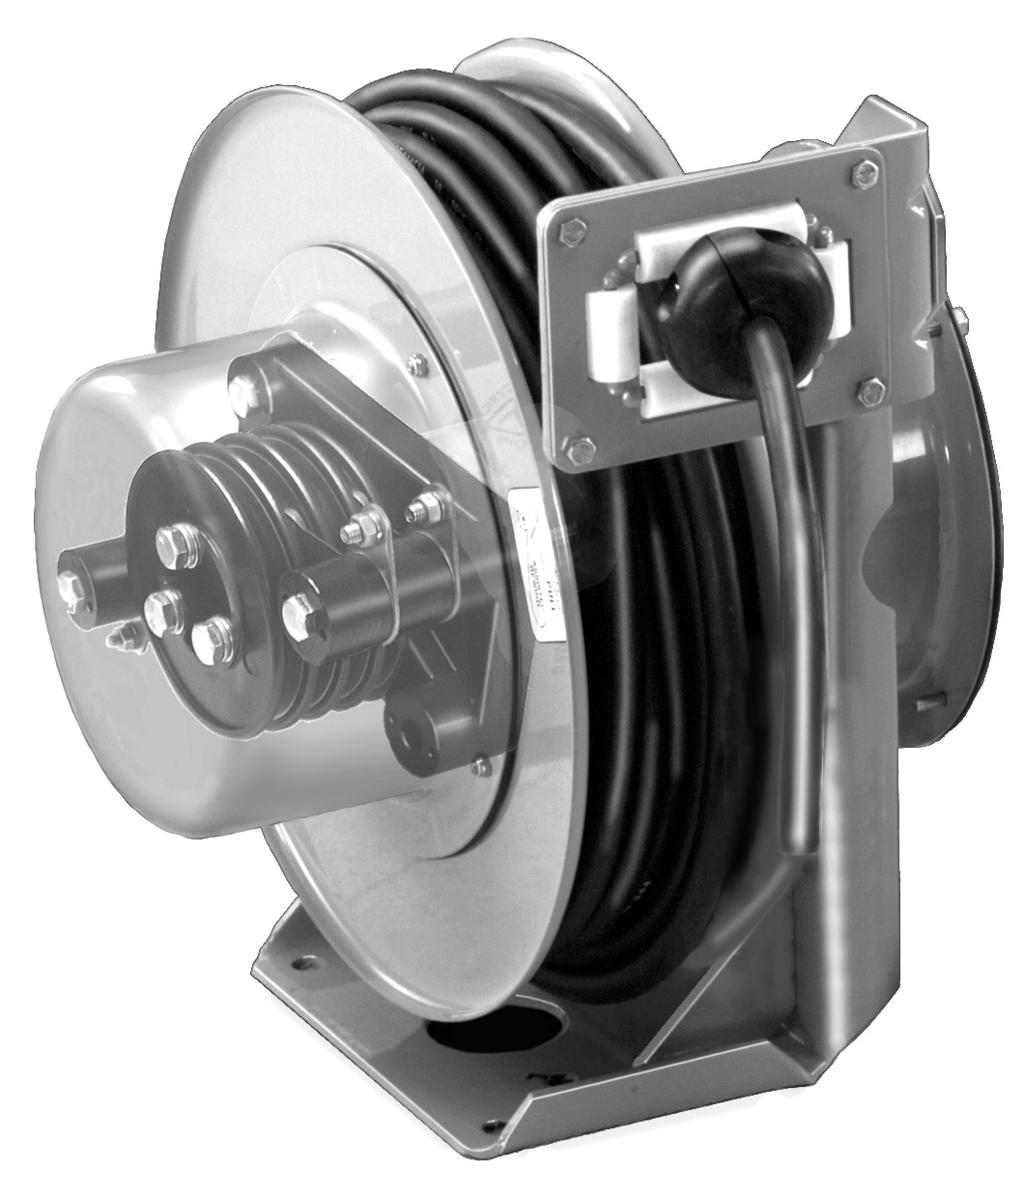 Entertainment Industry Products Cable Reels Series CM Cable-Master Reels Gleason Cable-Master Reels are ruggedly built and their design has been refined over many years of field use.